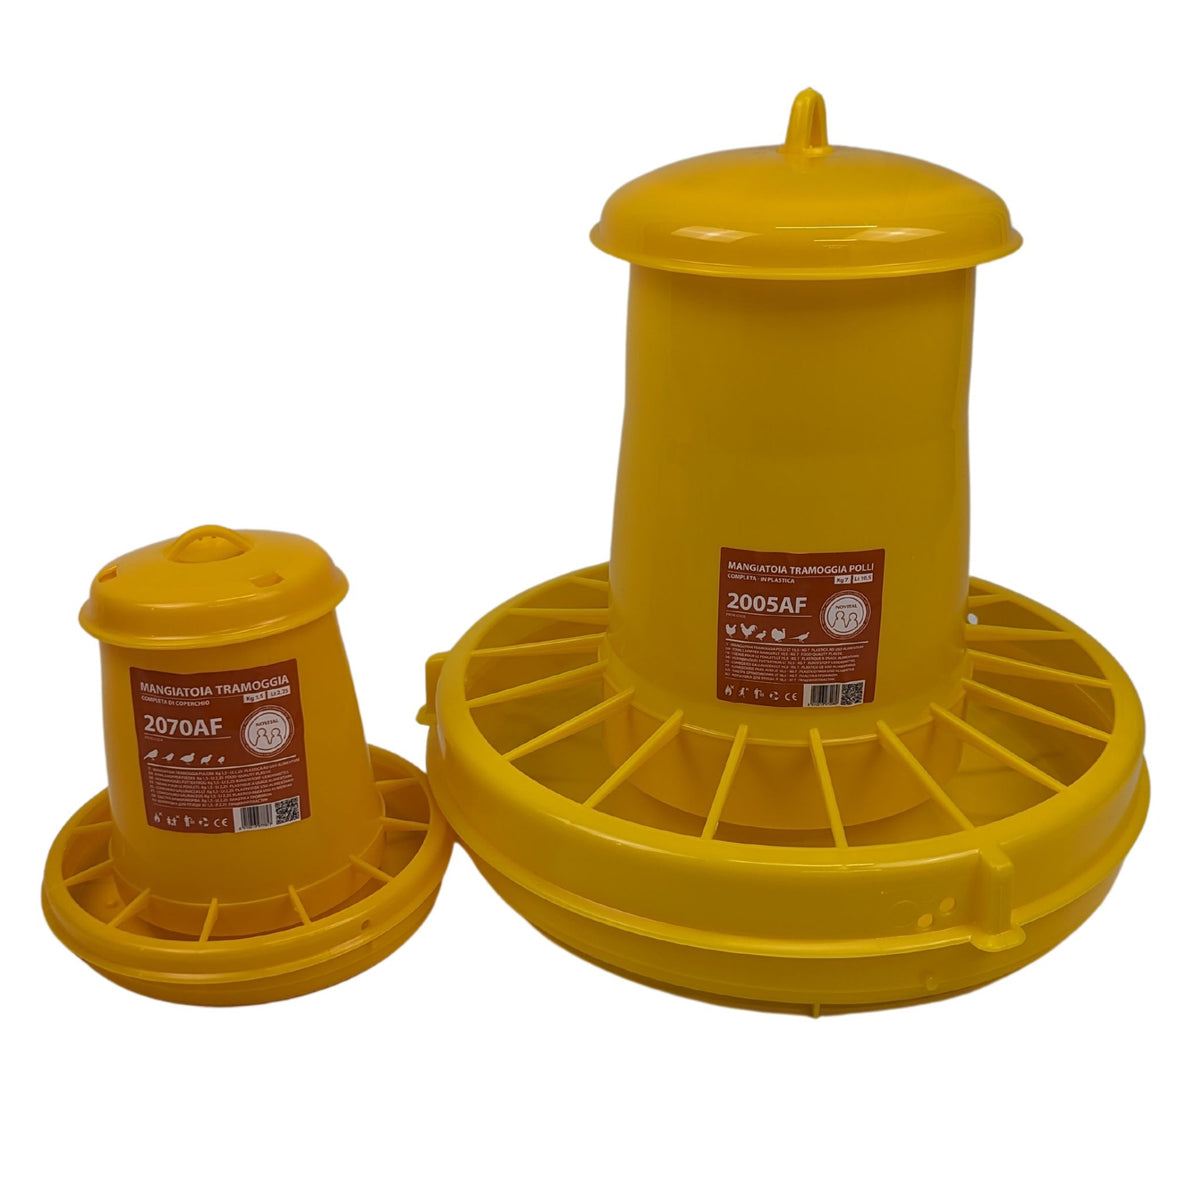 Saturn Yellow Poultry Feeder